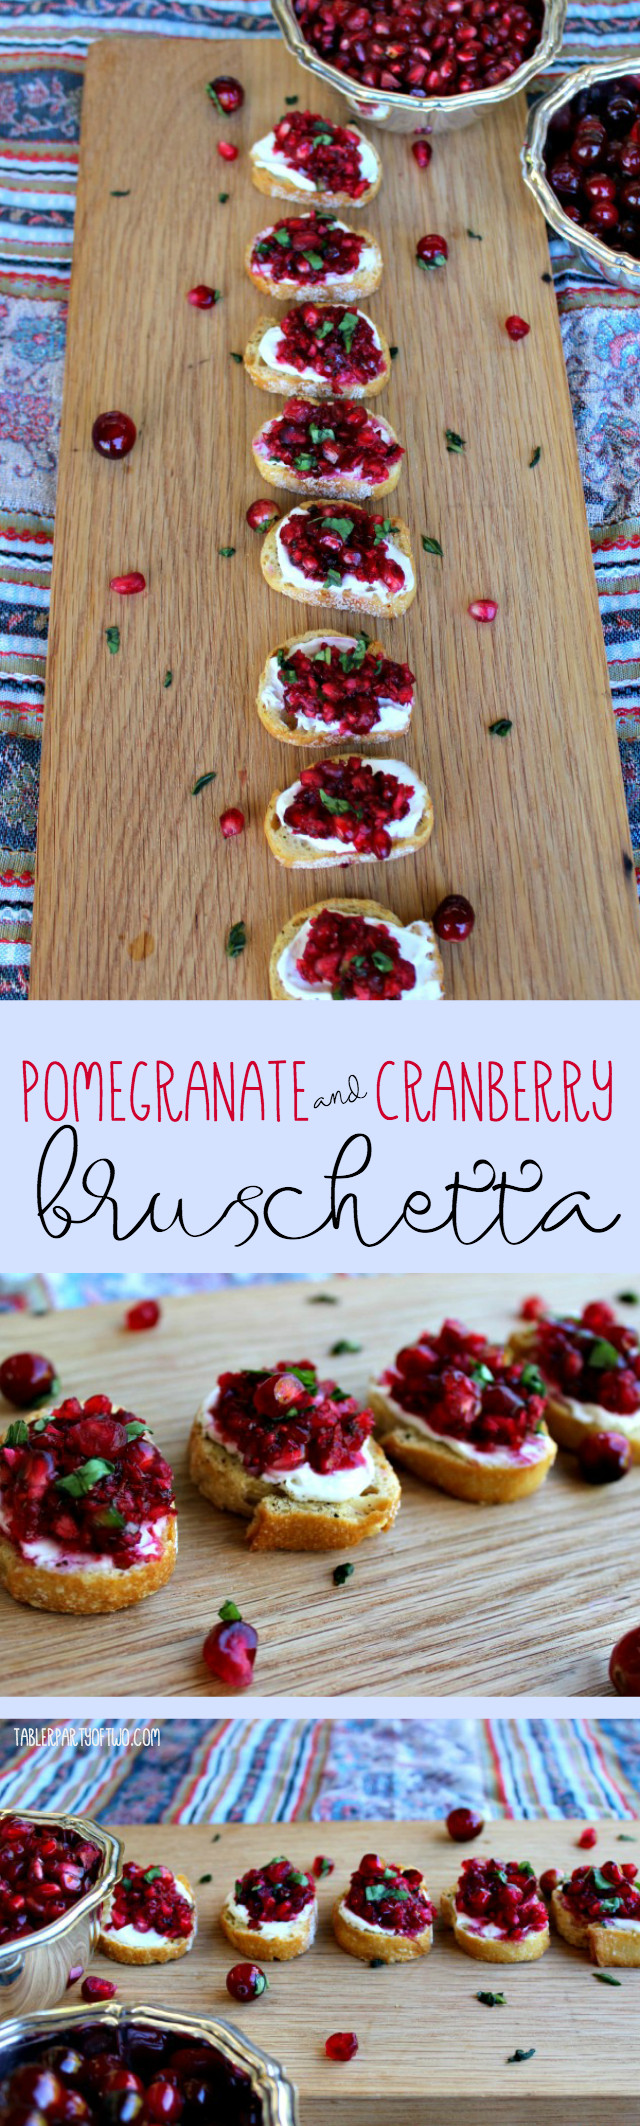 Thanksgiving Party Food
 Pomegranate and Cranberry Bruschetta Recipe